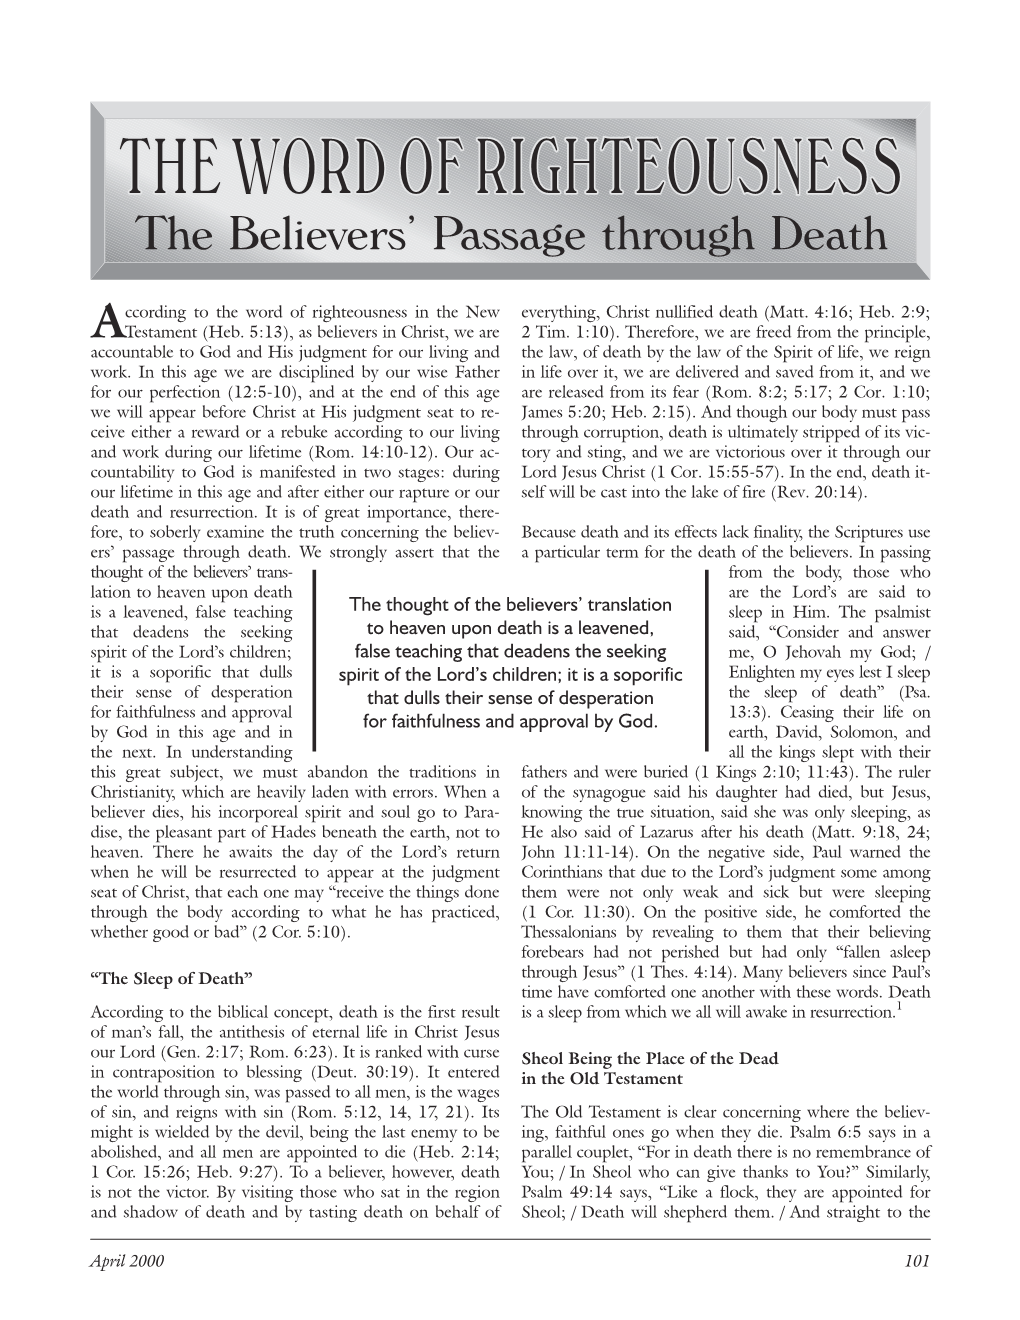 The Word of Righteousness the Believers' Passage Through Death